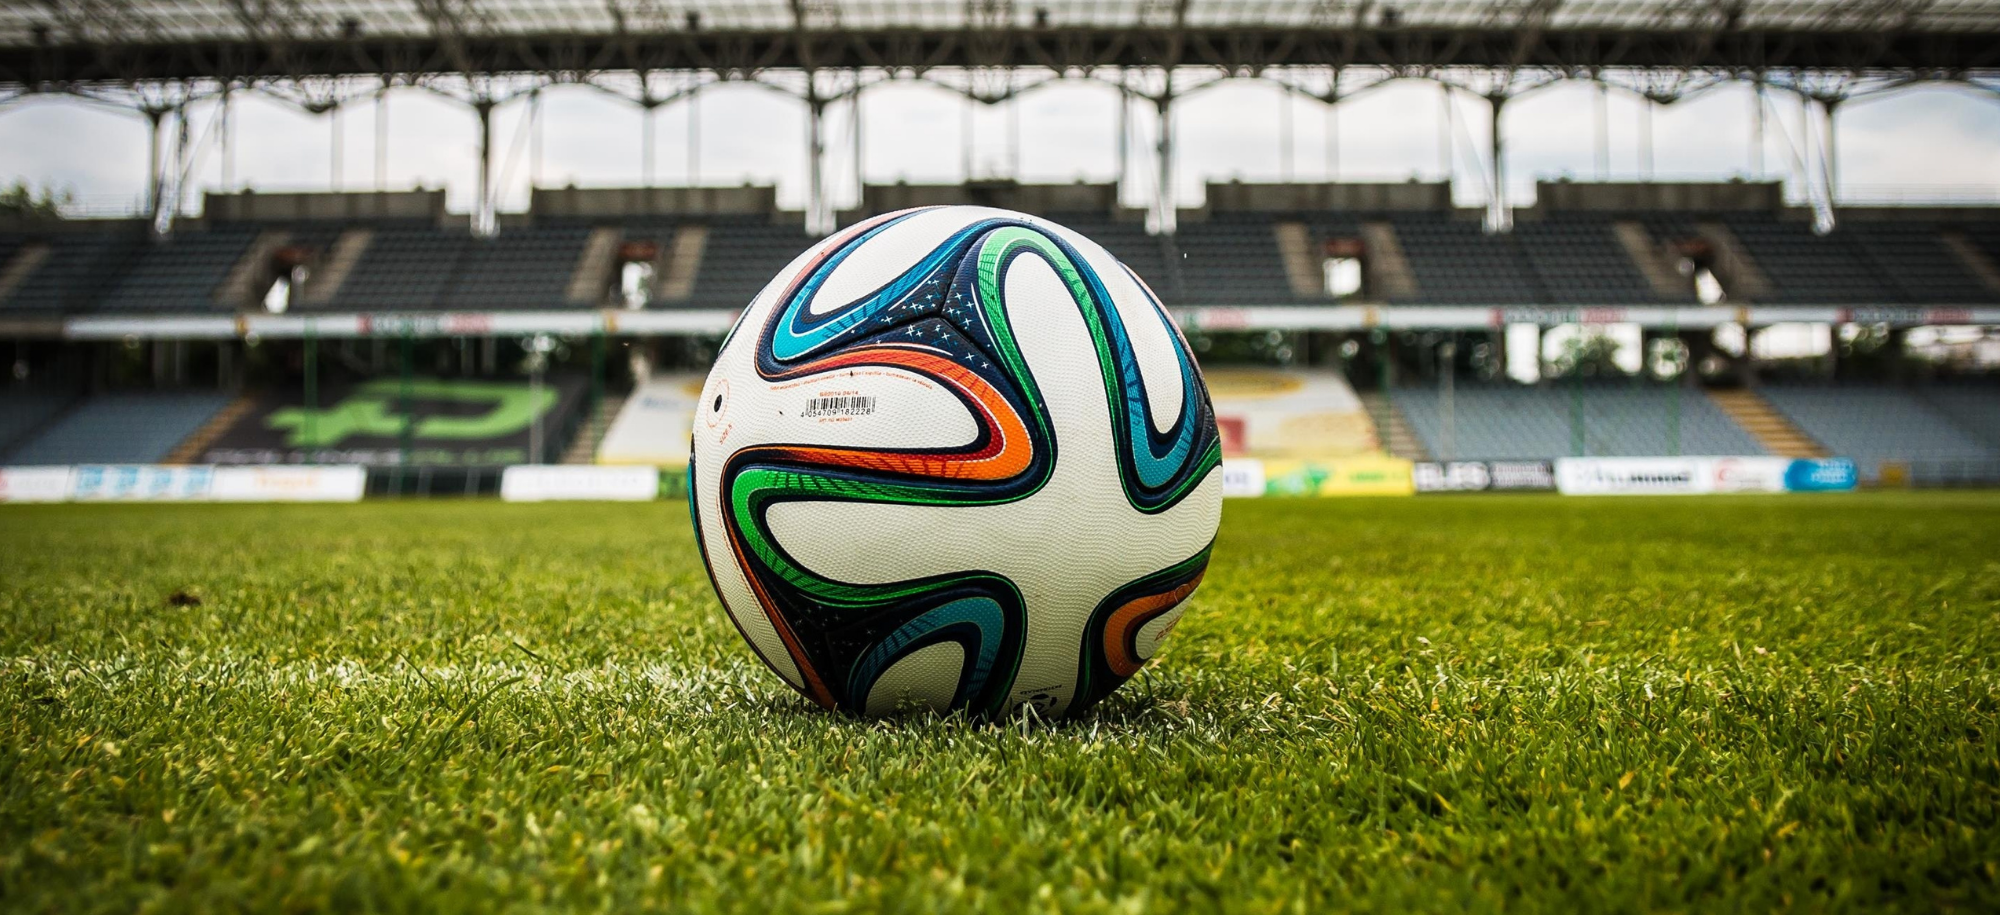 A football on a pitch in the middle of a stadium